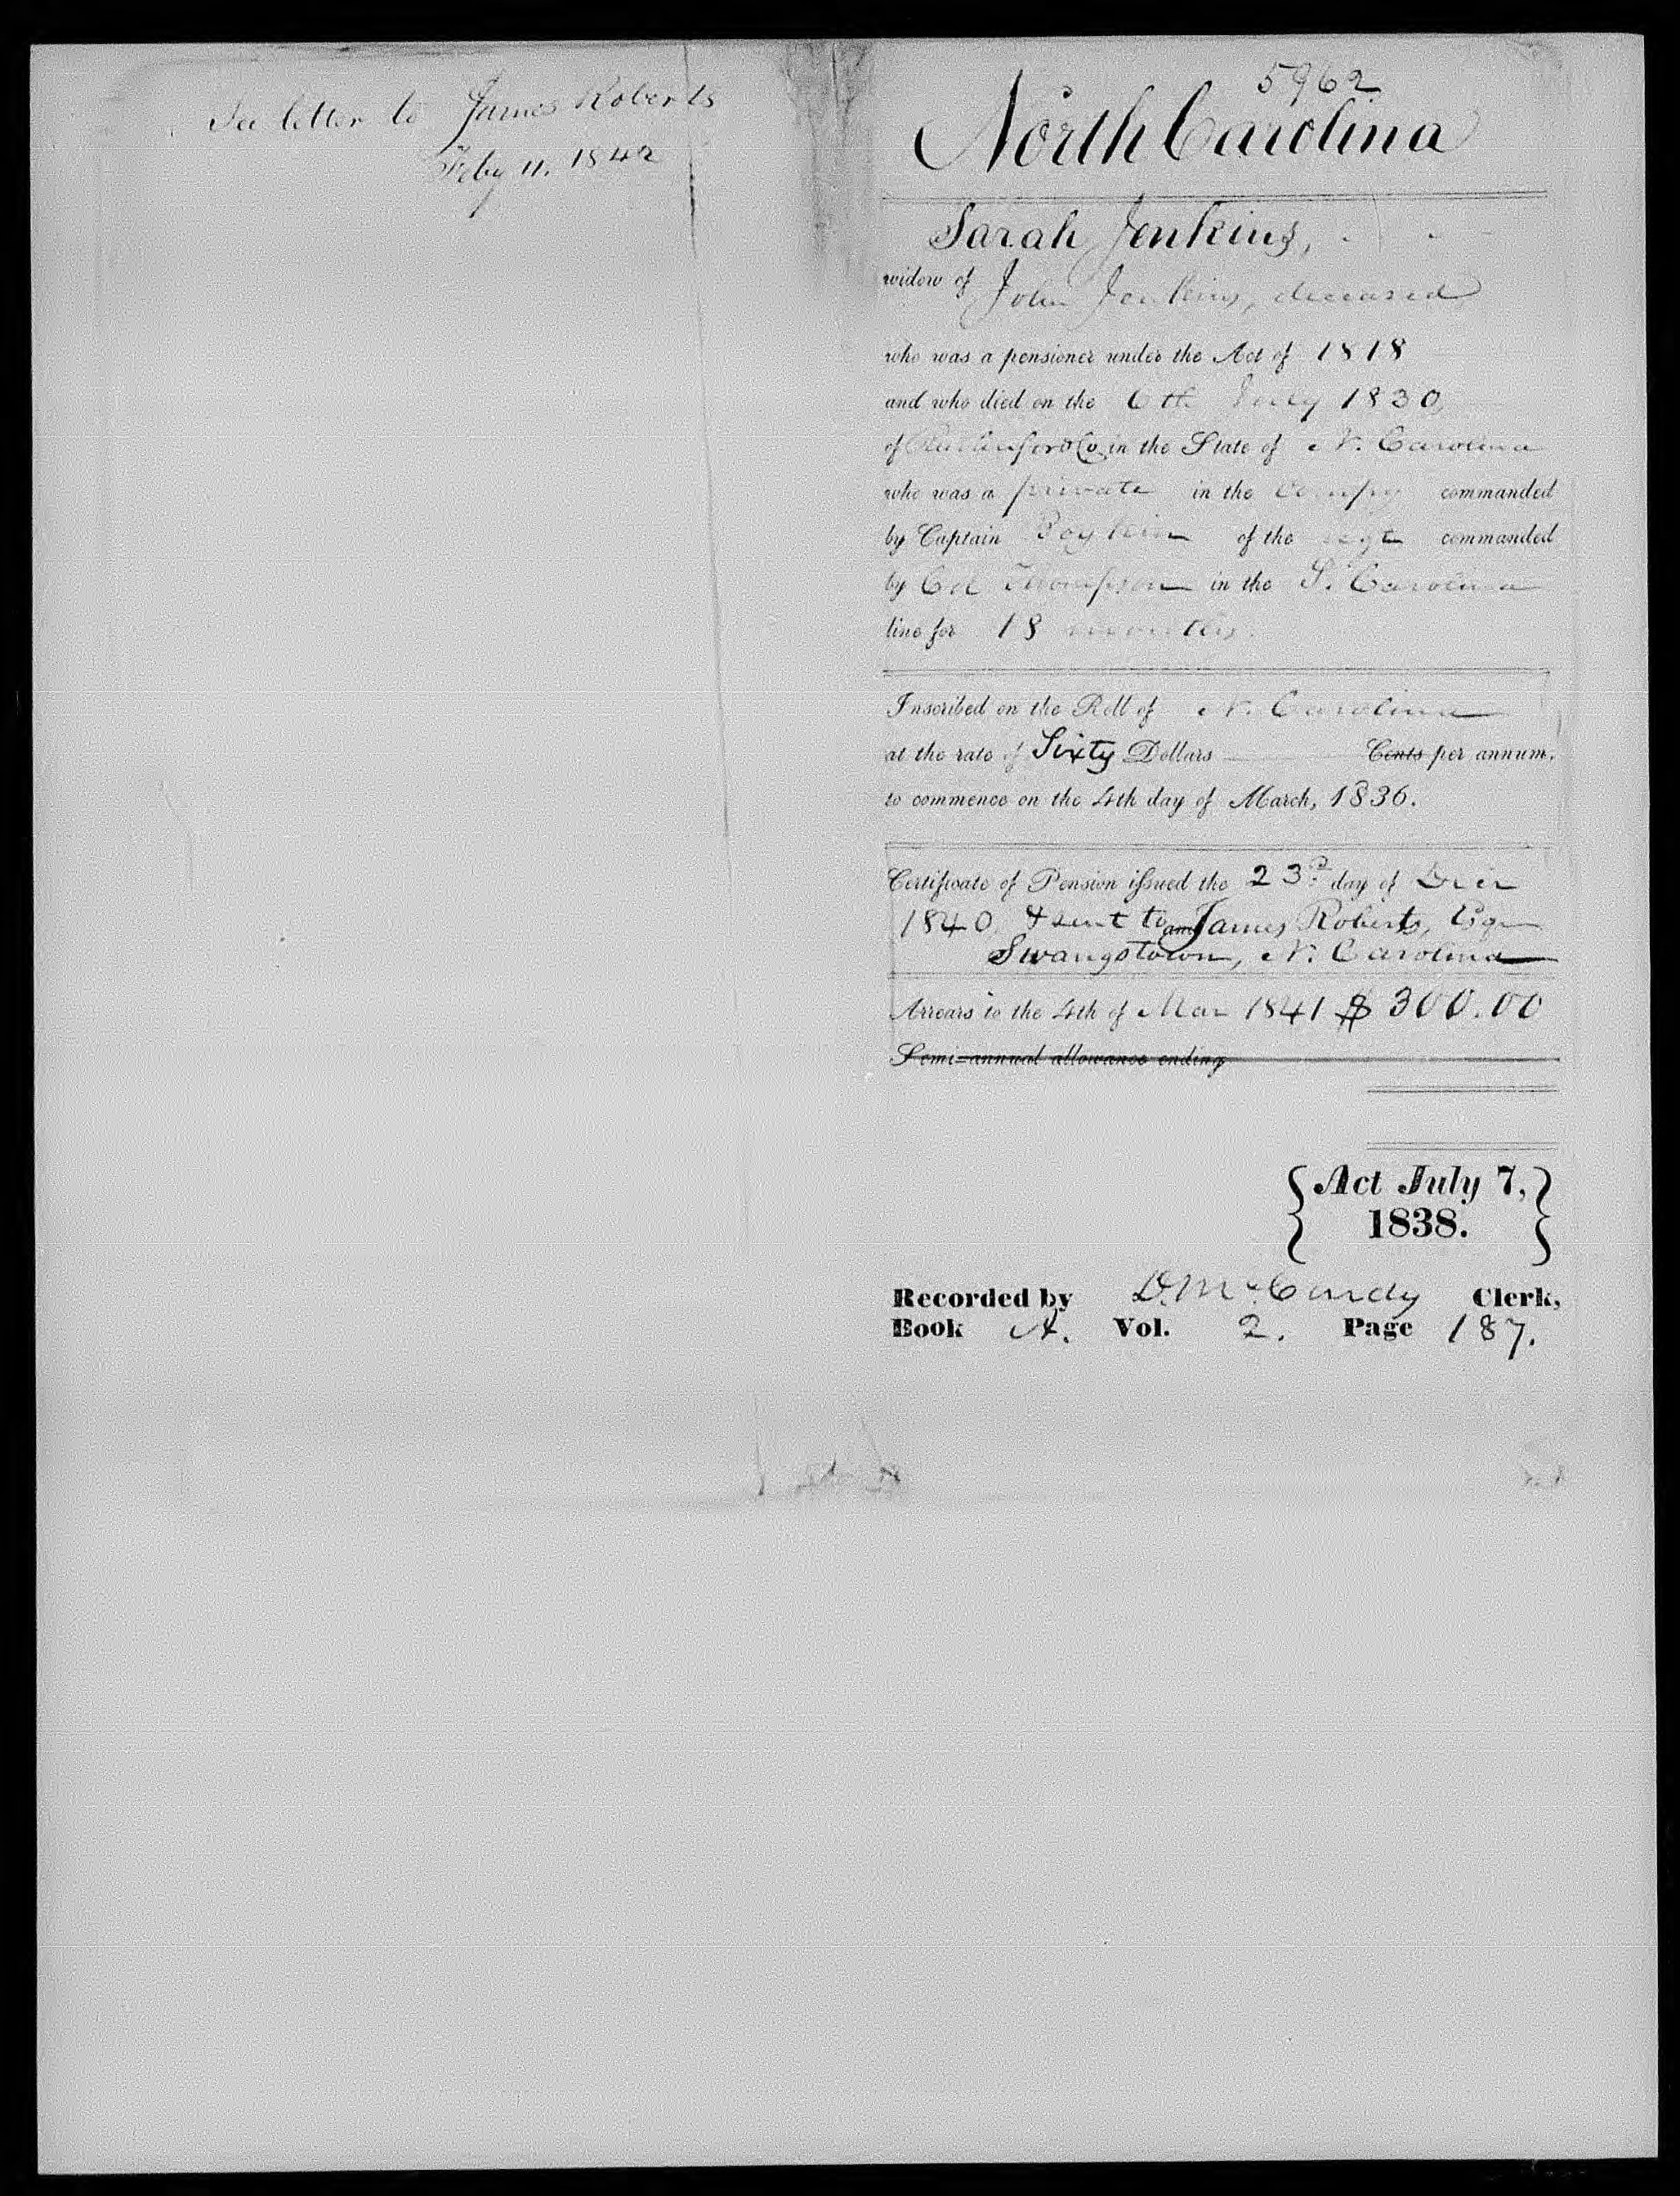 Docket for Widow's Pension from the U.S. Pension Office for Sarah Jenkins, 23 December 1840